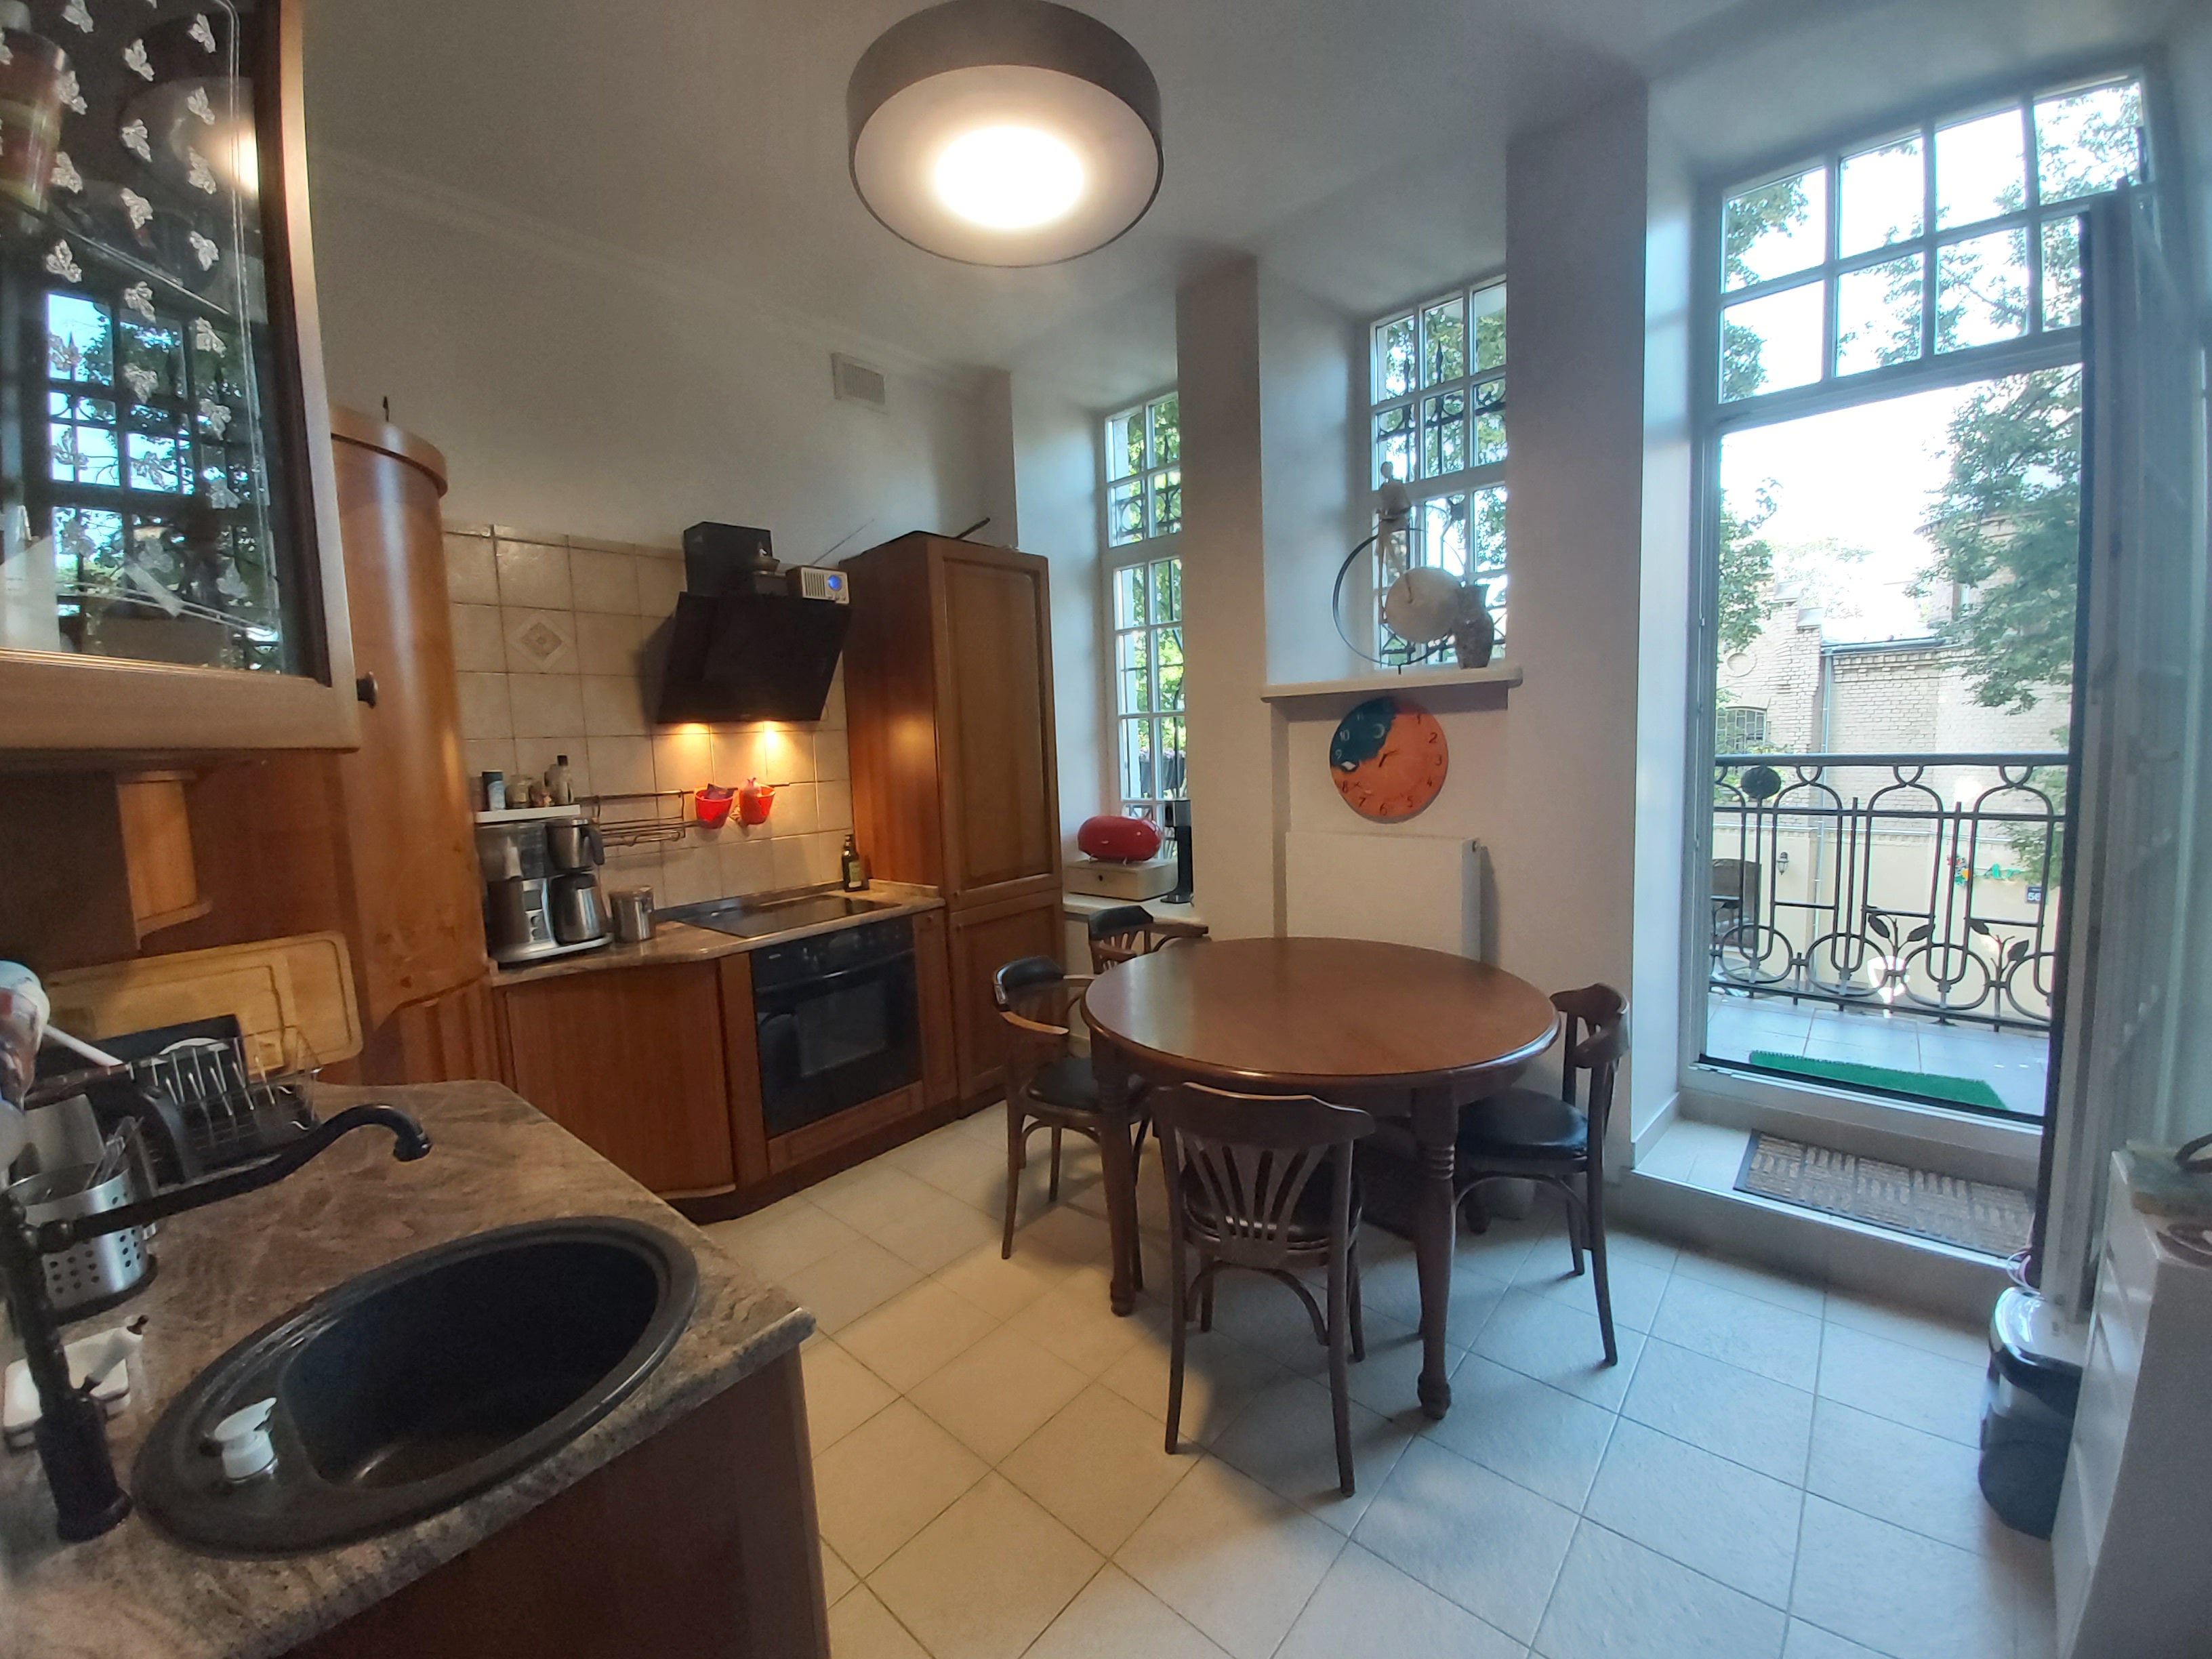 Apartment for rent, Stabu street 56 - Image 1